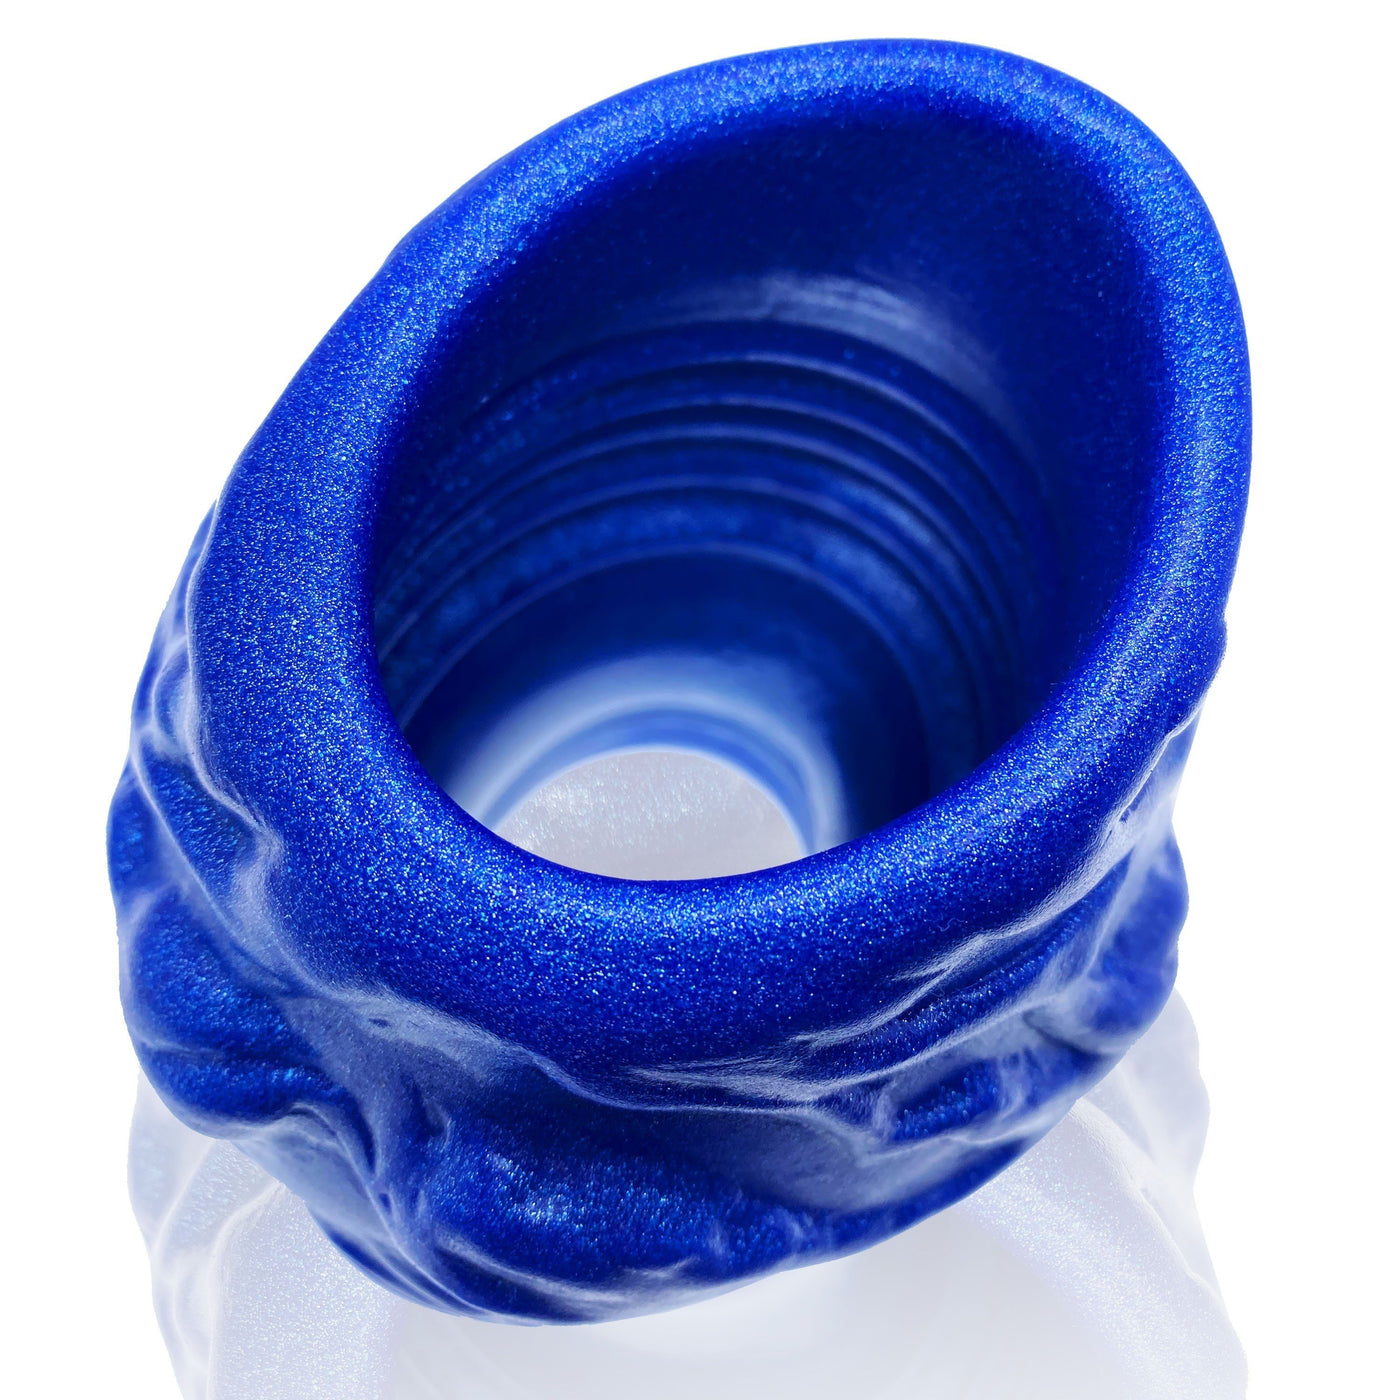 Oxballs Pighole Squeal Hollow Anal Plug - Large & Extra-Soft - Hamilton Park Electronics